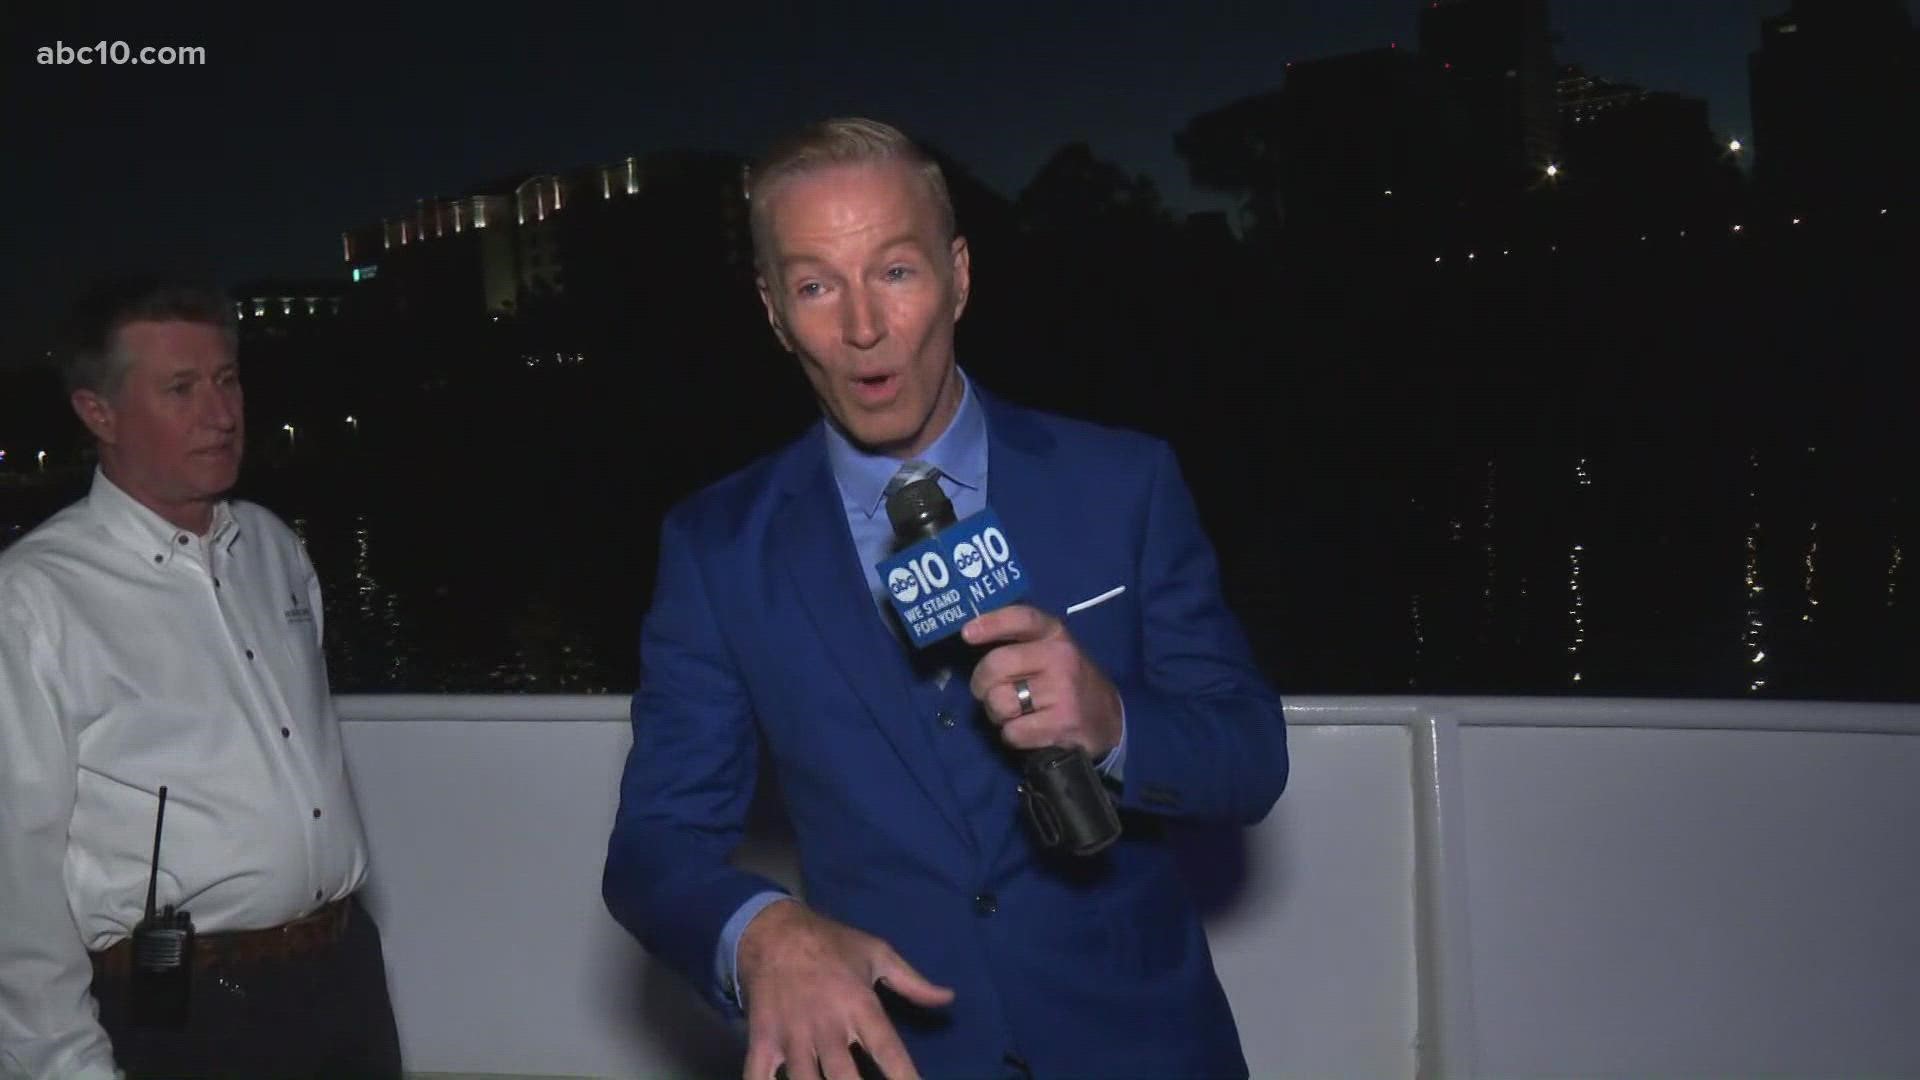 ABC10's Mark S. Allen is live on the Sacramento Waterfront, giving you a tour in a unique way.